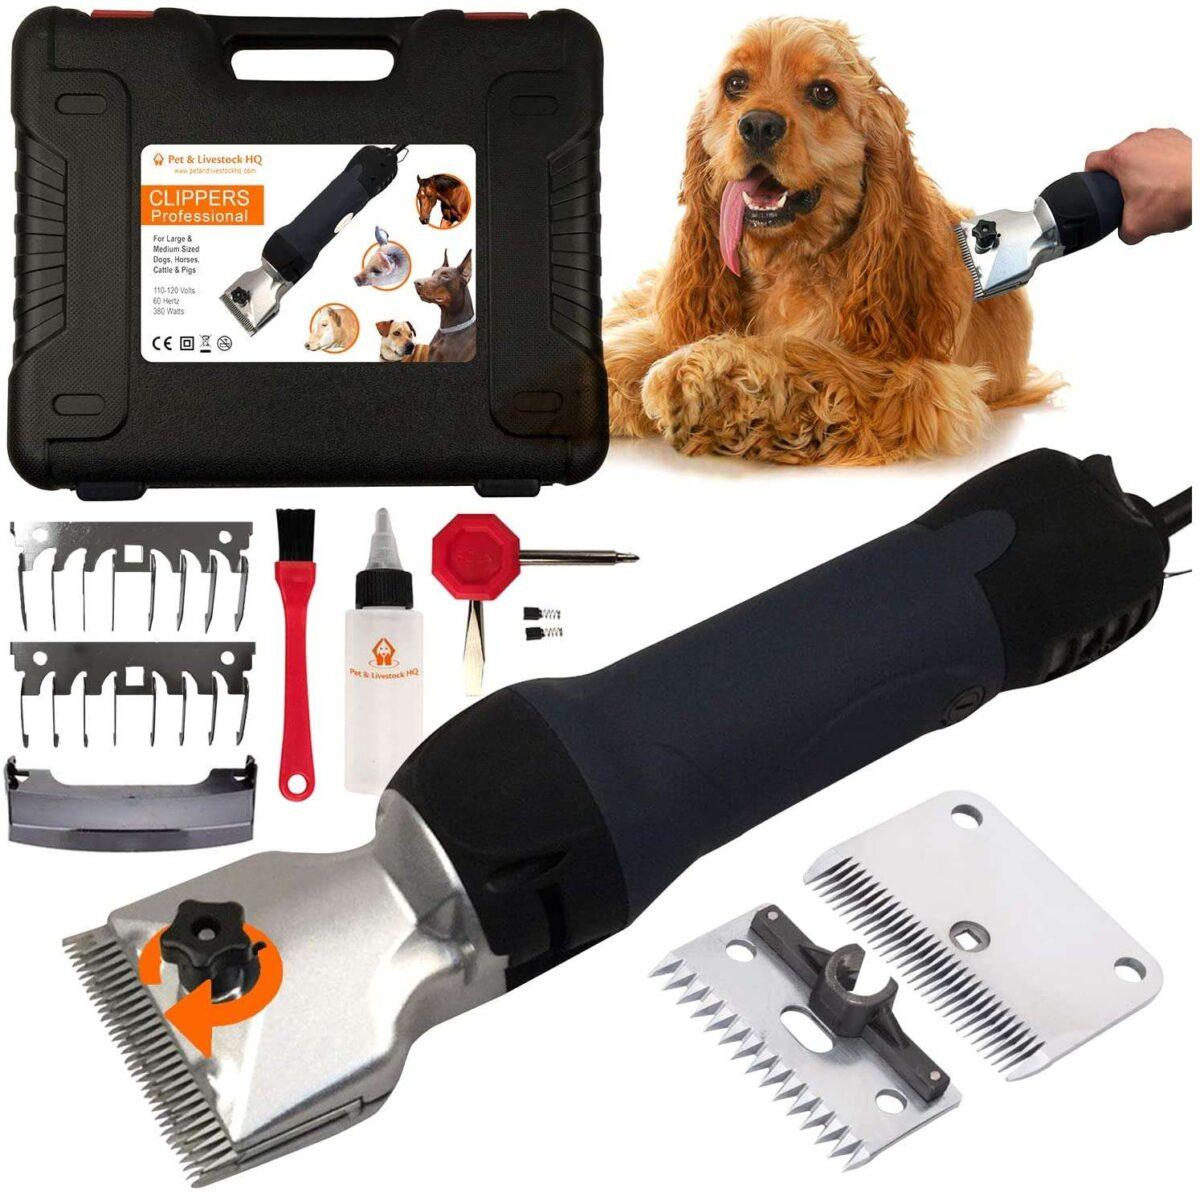  Top 5 Best dog grooming clippers